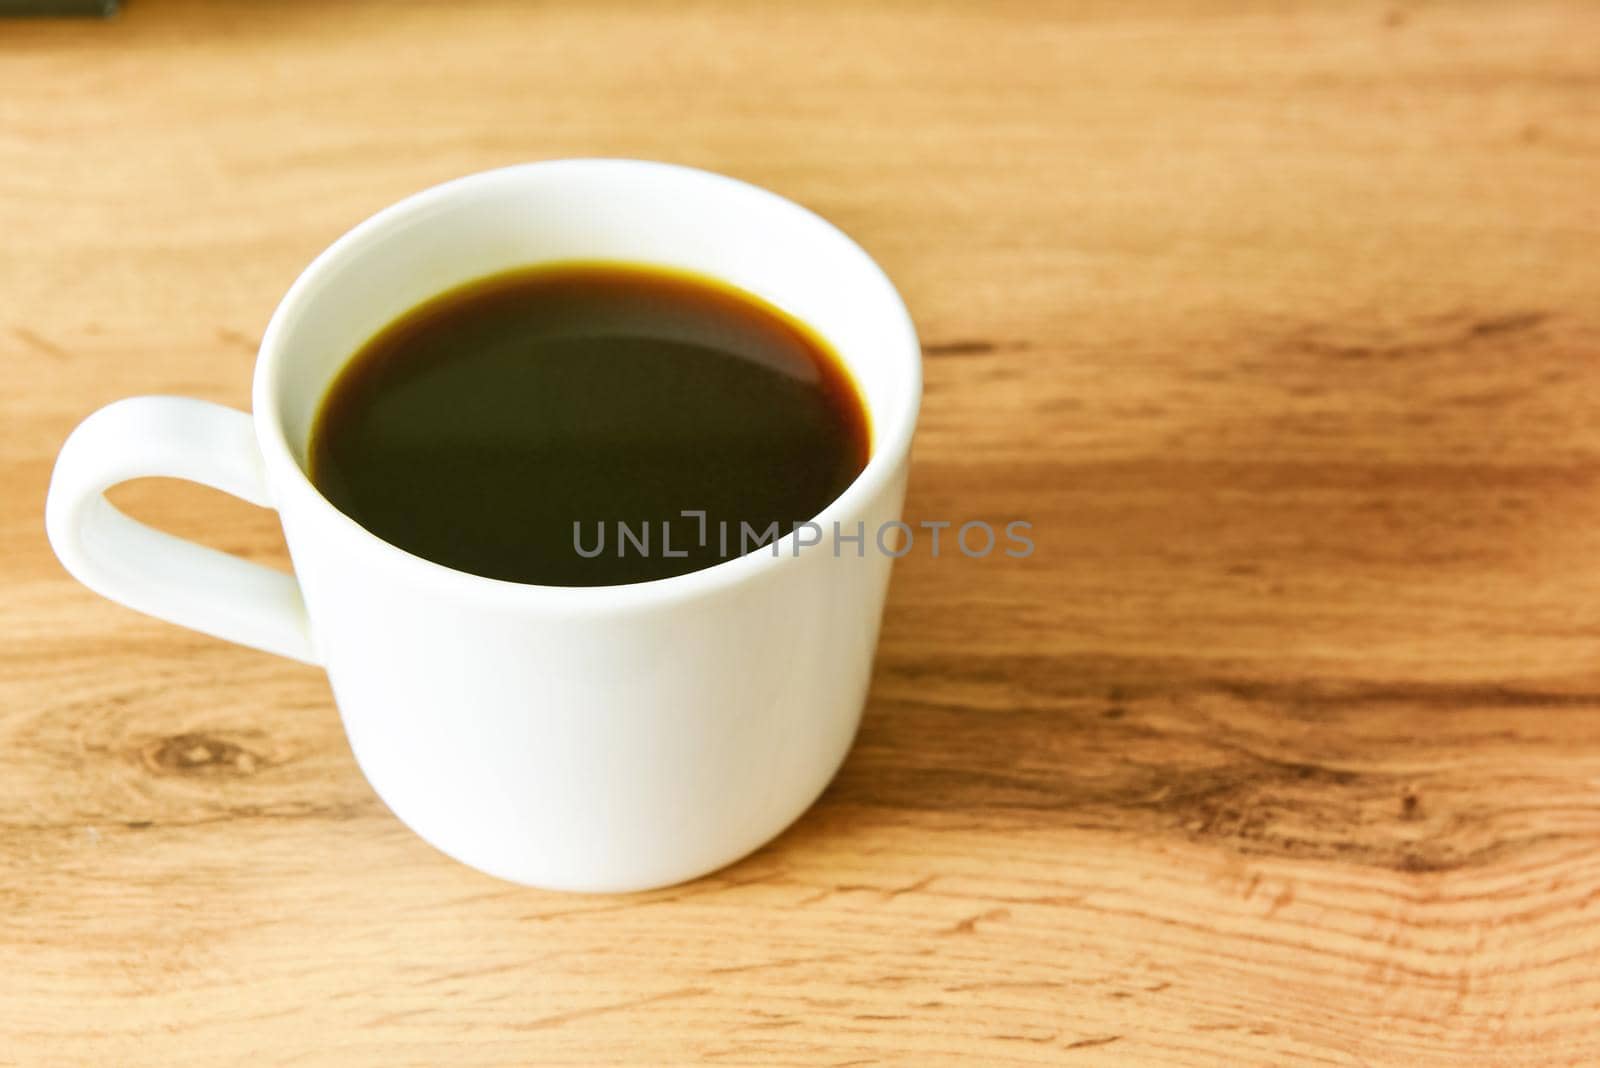 White cup of strong black coffee on wooden surface close up.